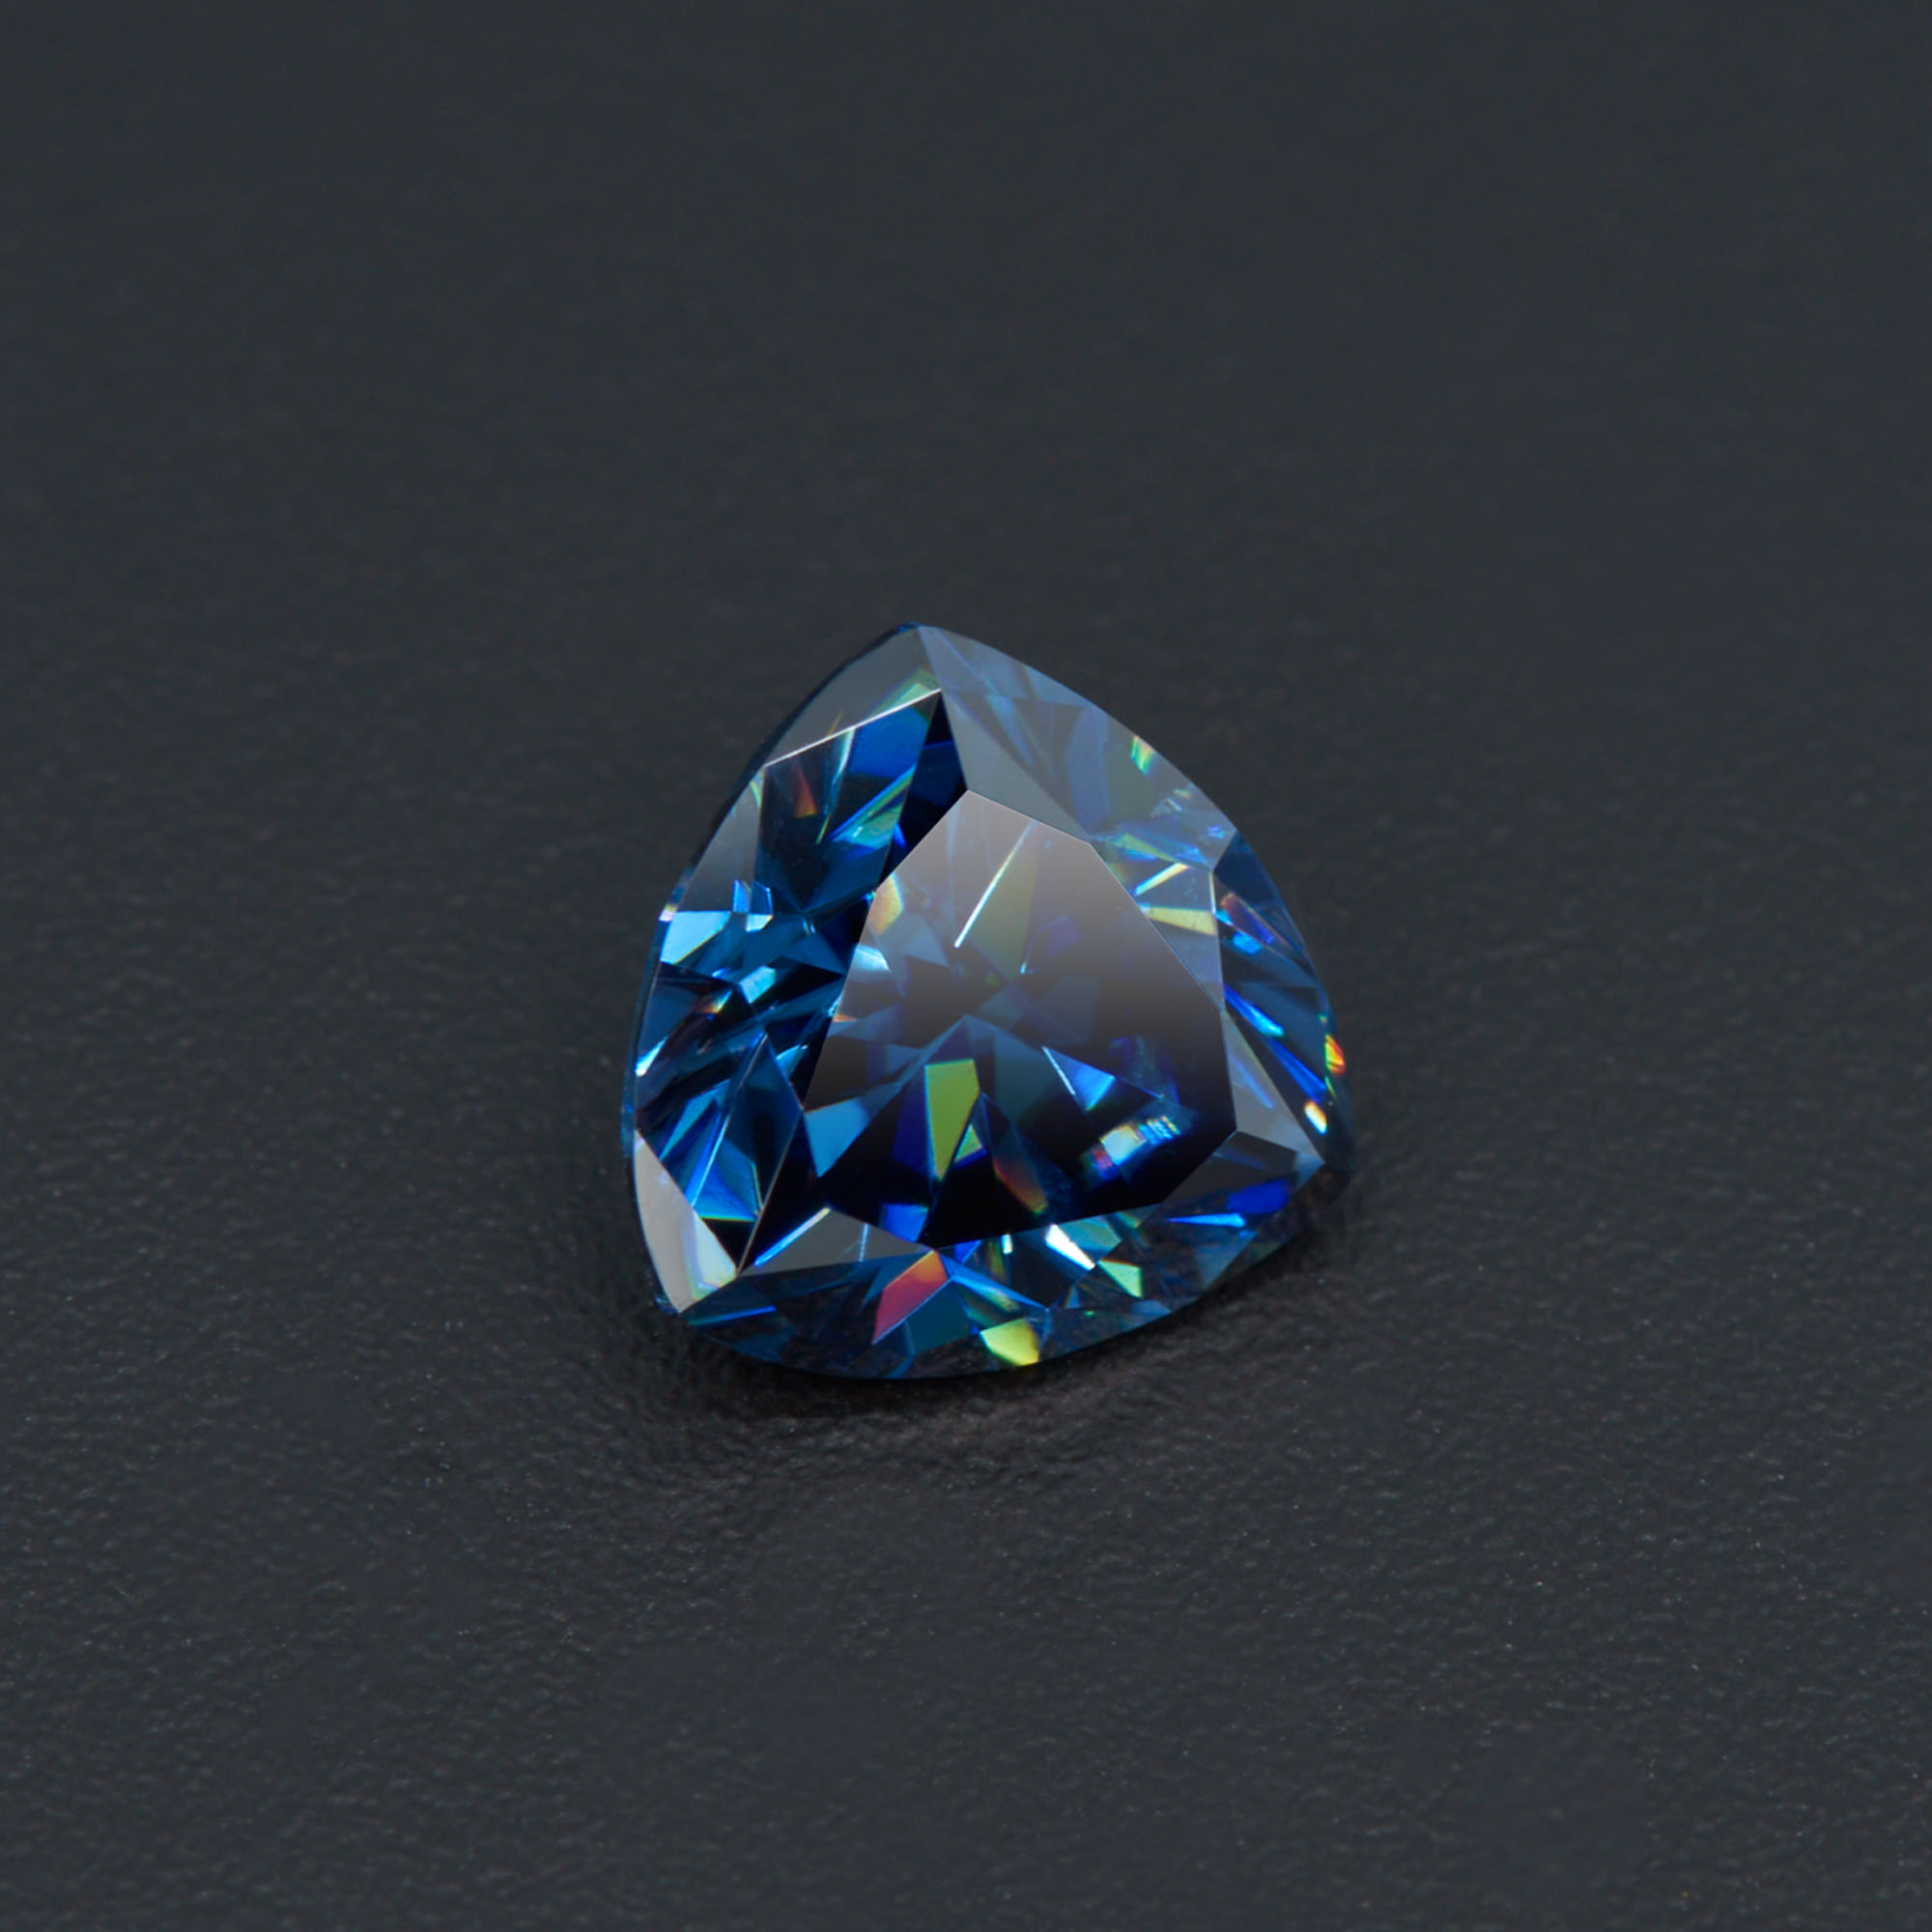 GIGAJEWE Natural Blue Color Trillion Hand Cut Moissanite Stone Loose Synthetic Diamond Pass Diamond Test with Certificate